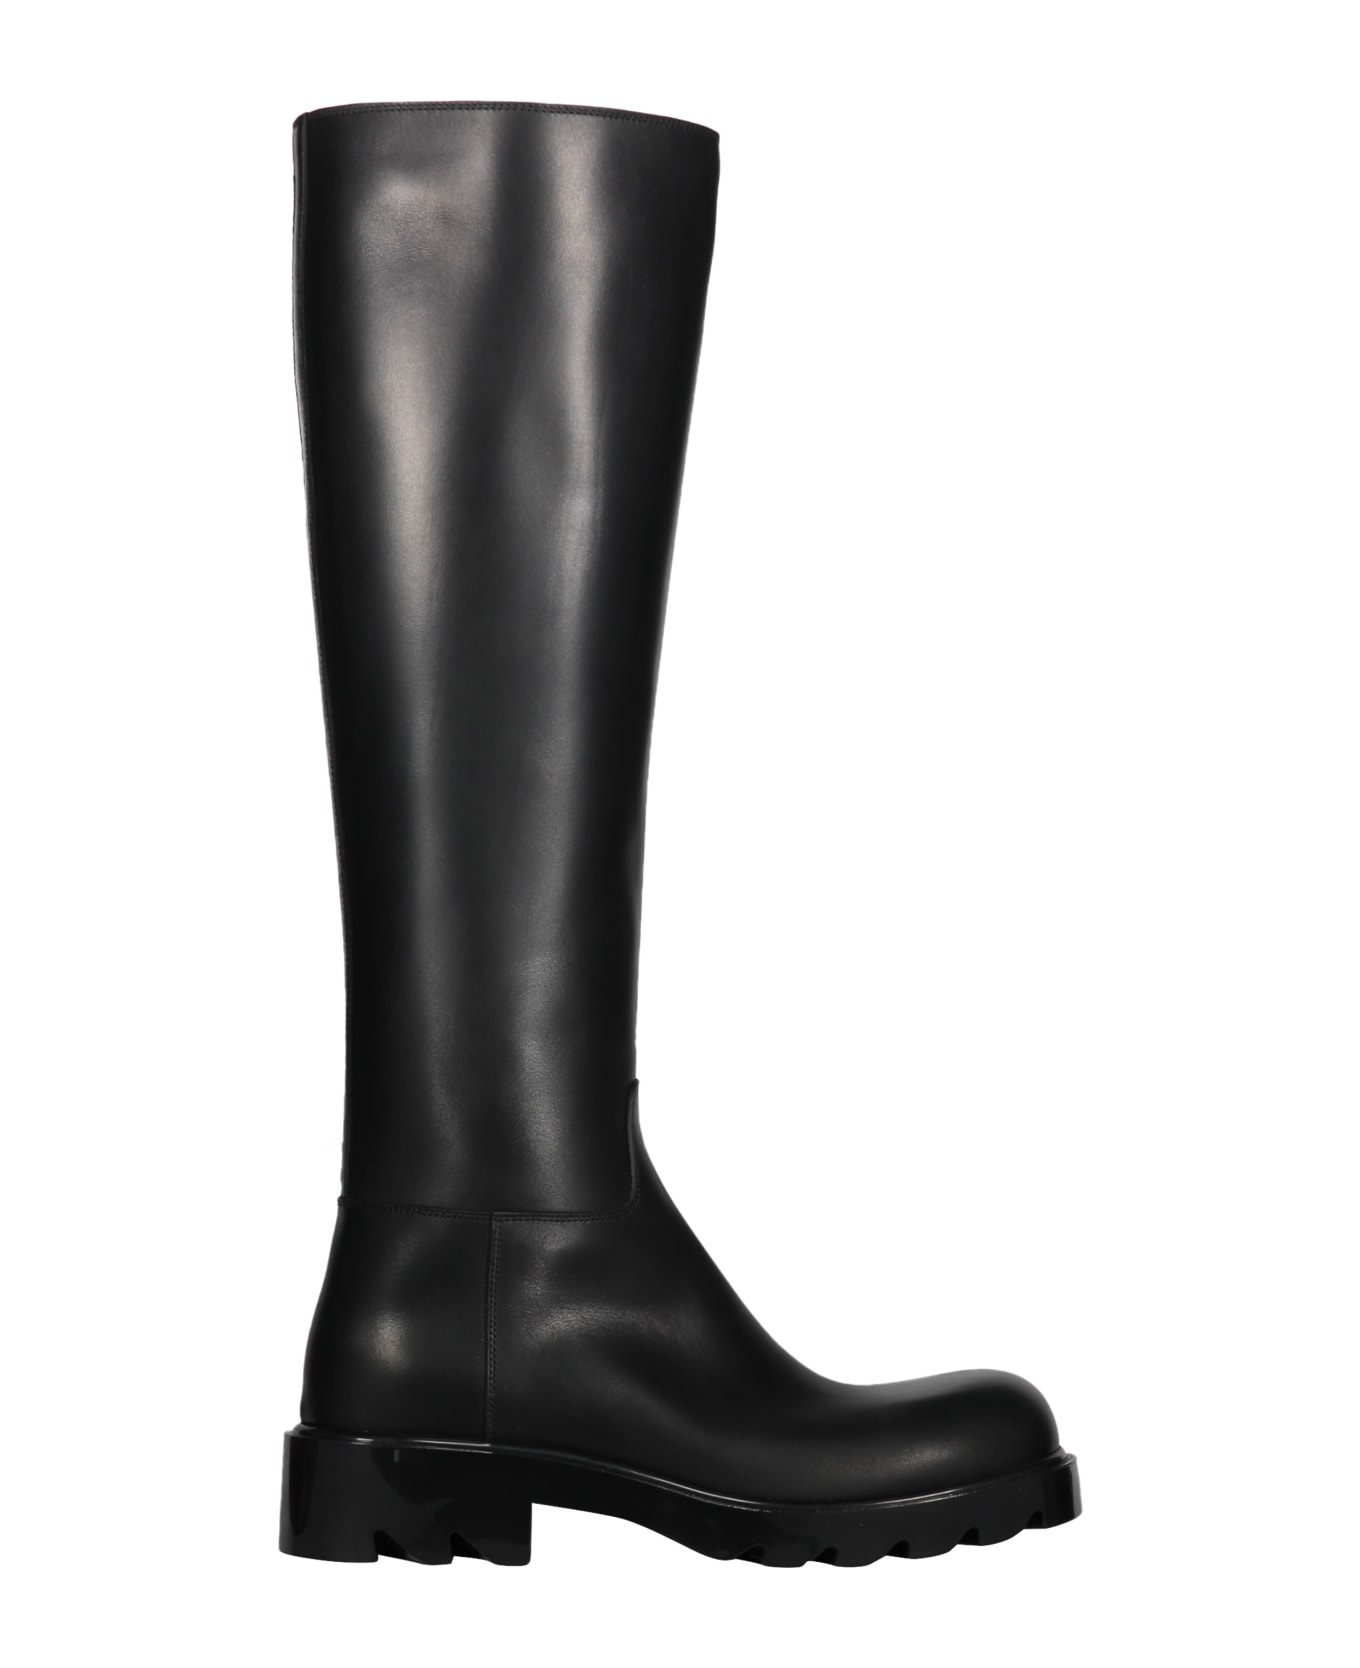 Strut Leather Boots - 1